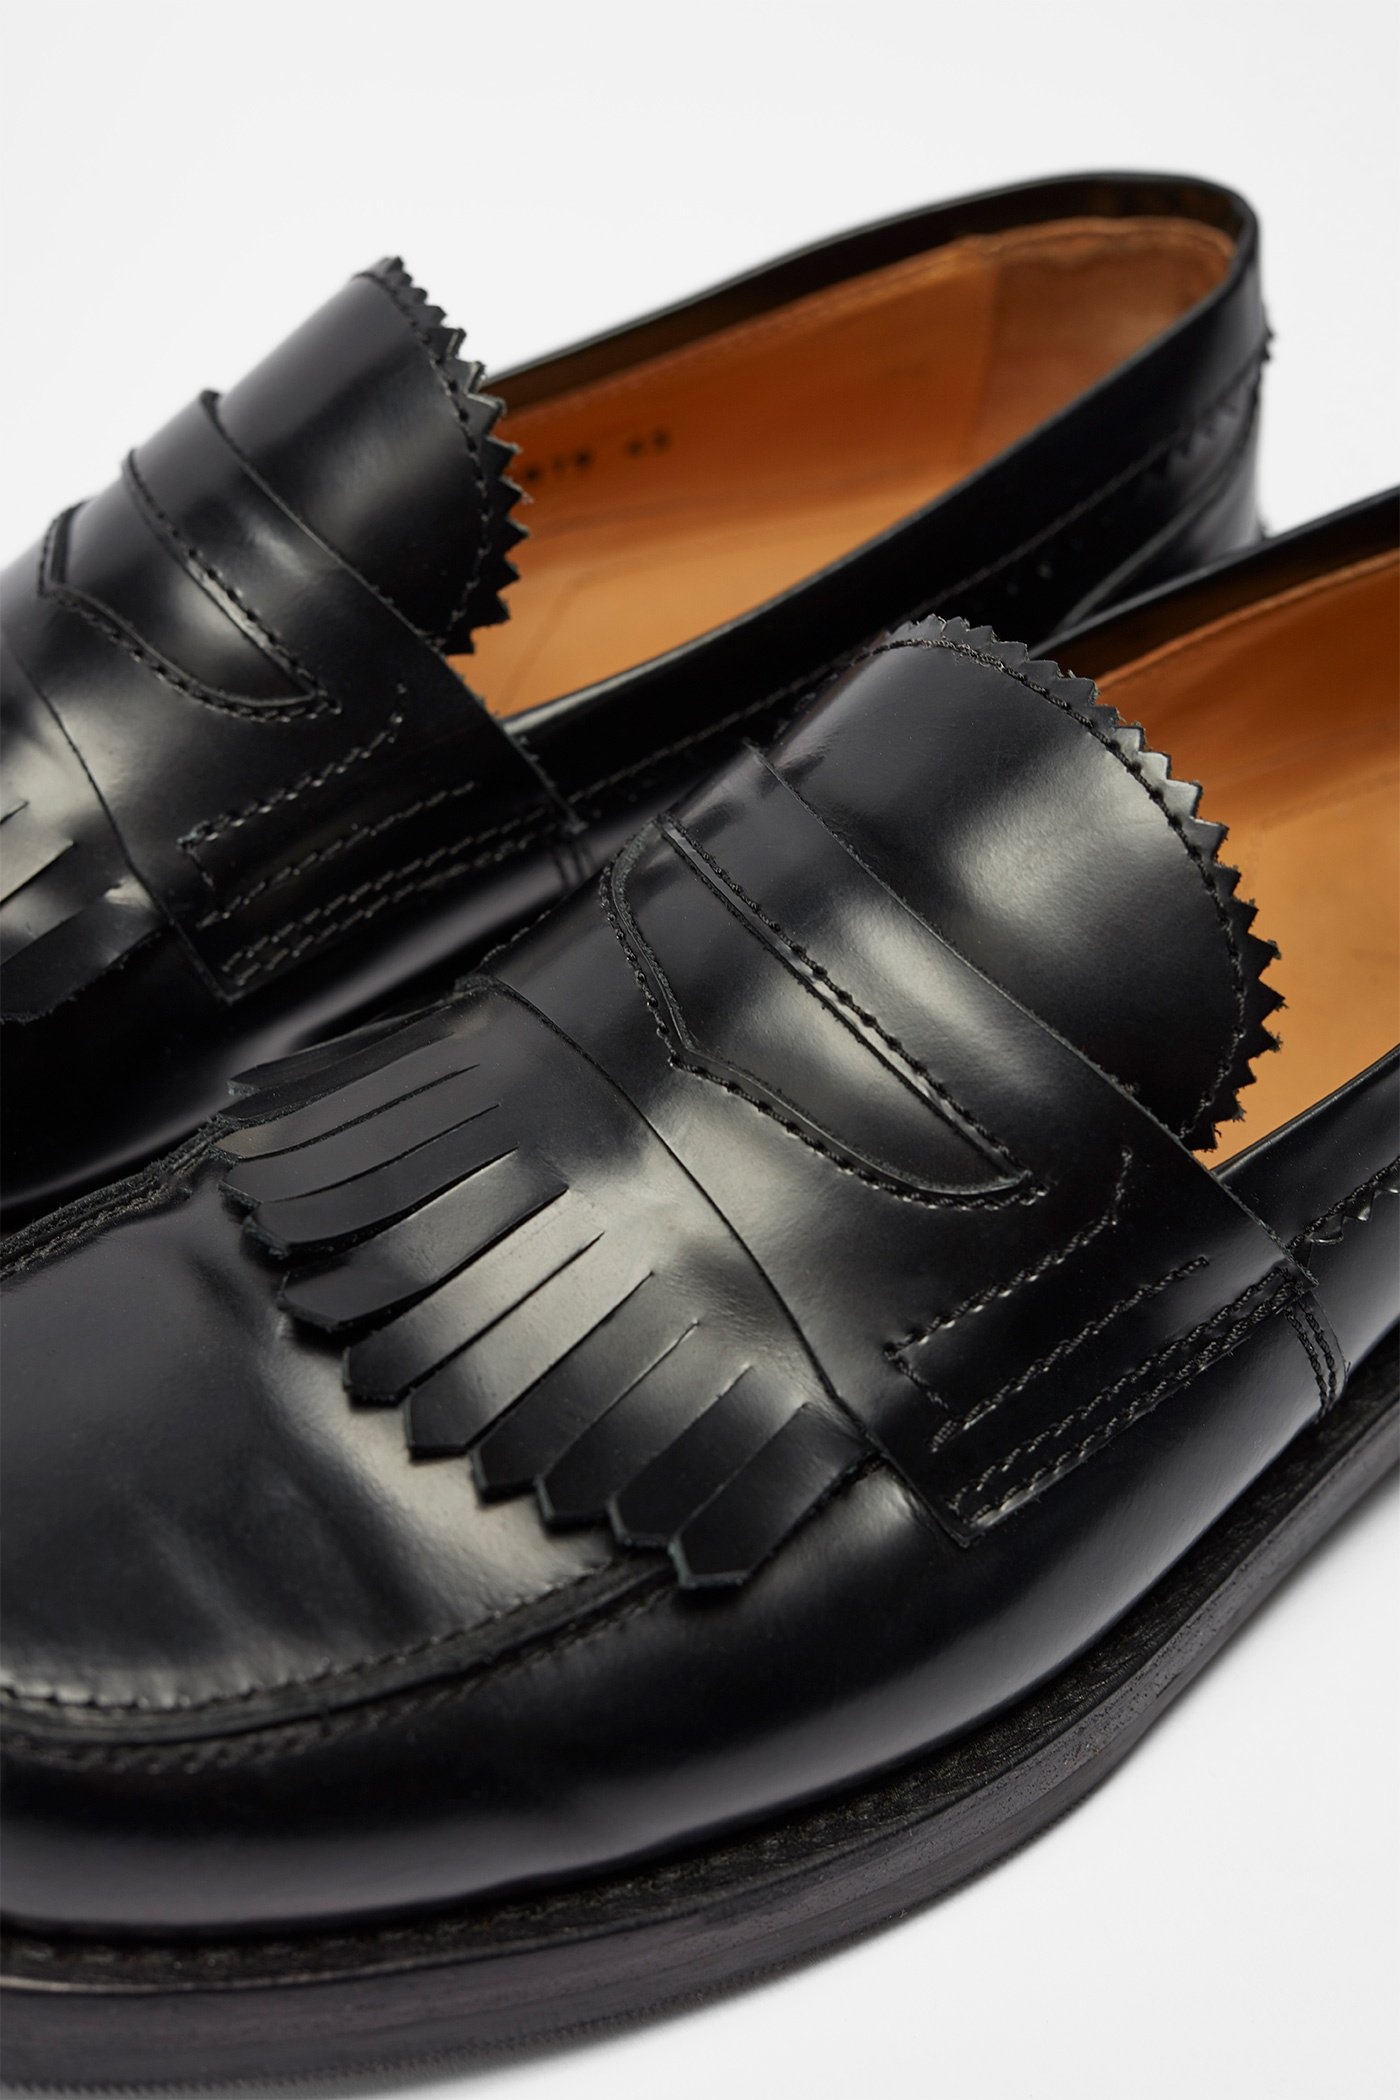 OUR LEGACY tassel-detail leather loafers - Black